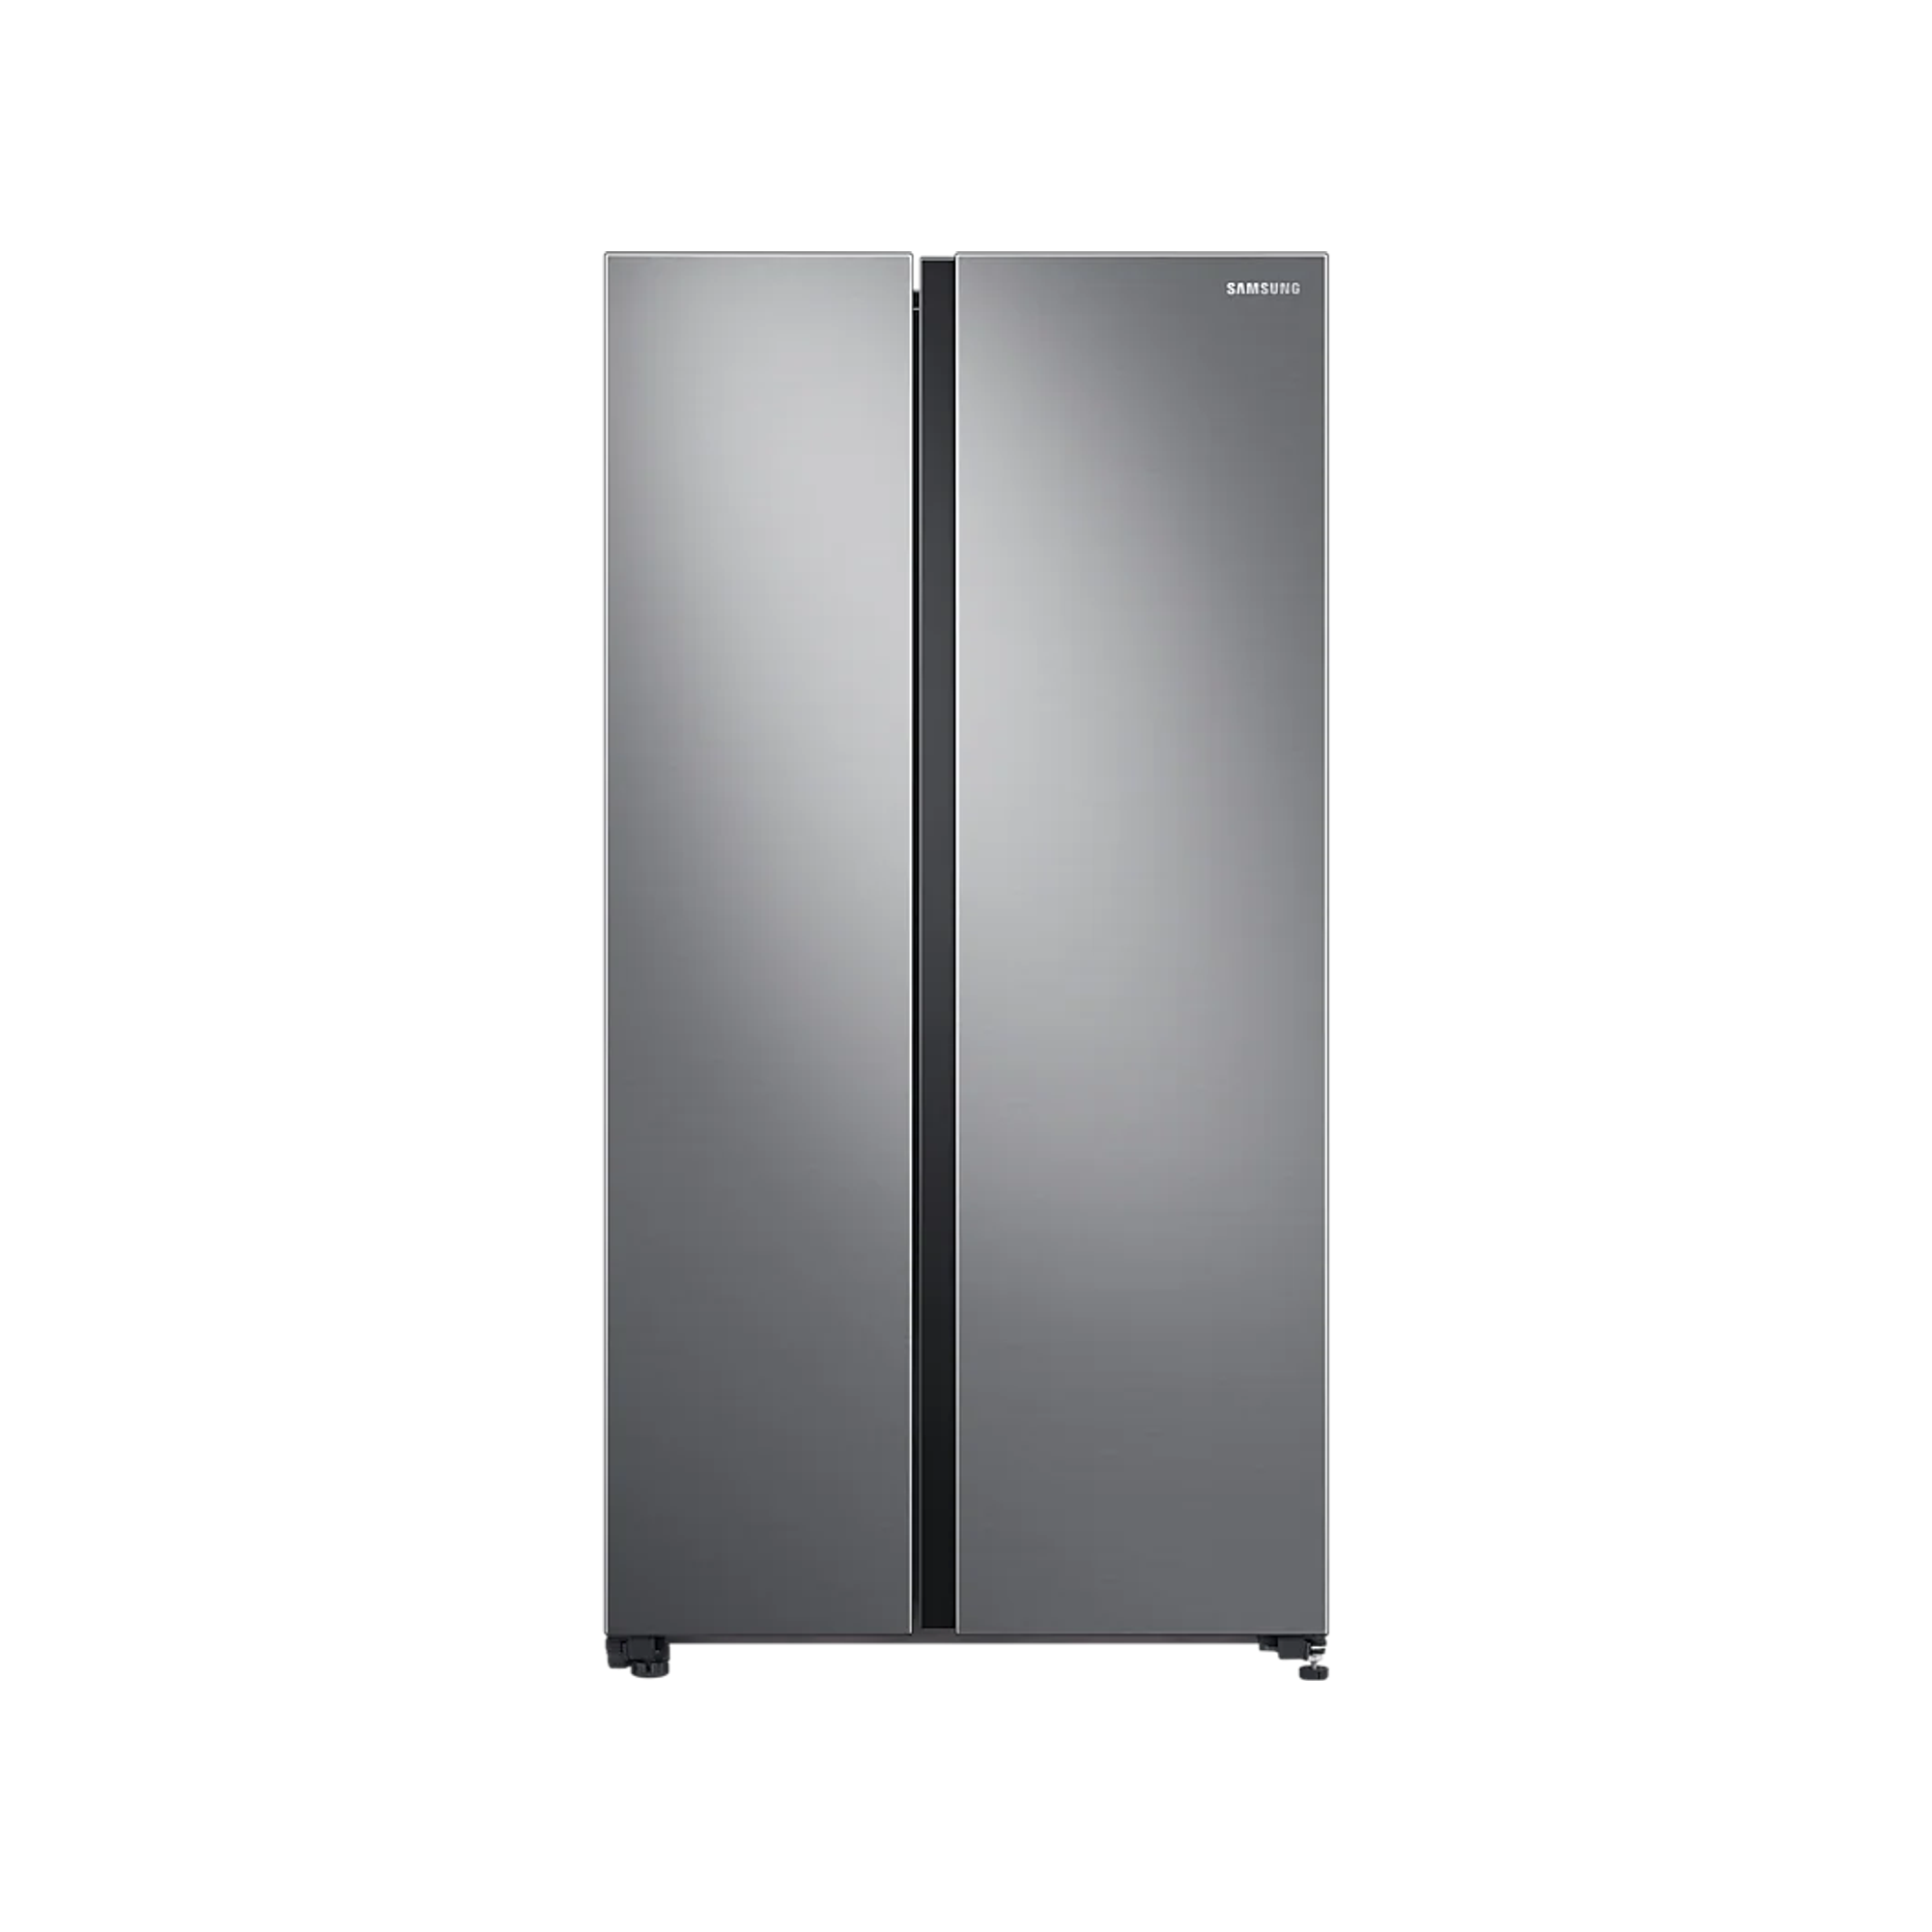 Samsung 647L Side By Side Fridge With Space Max Technology - Matt Silver